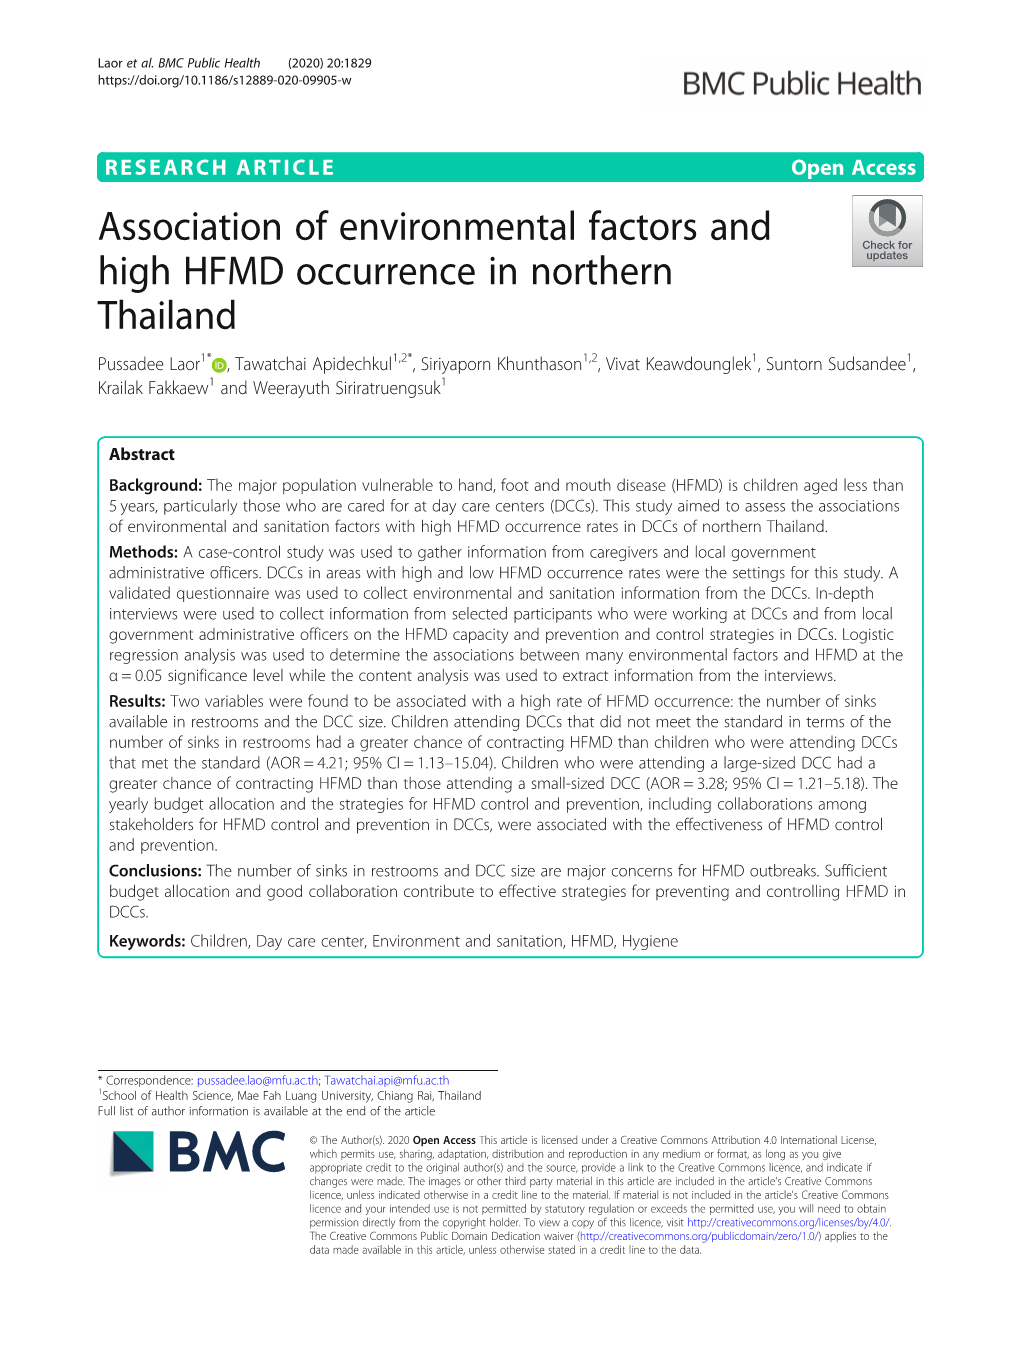 Association of Environmental Factors and High HFMD Occurrence In